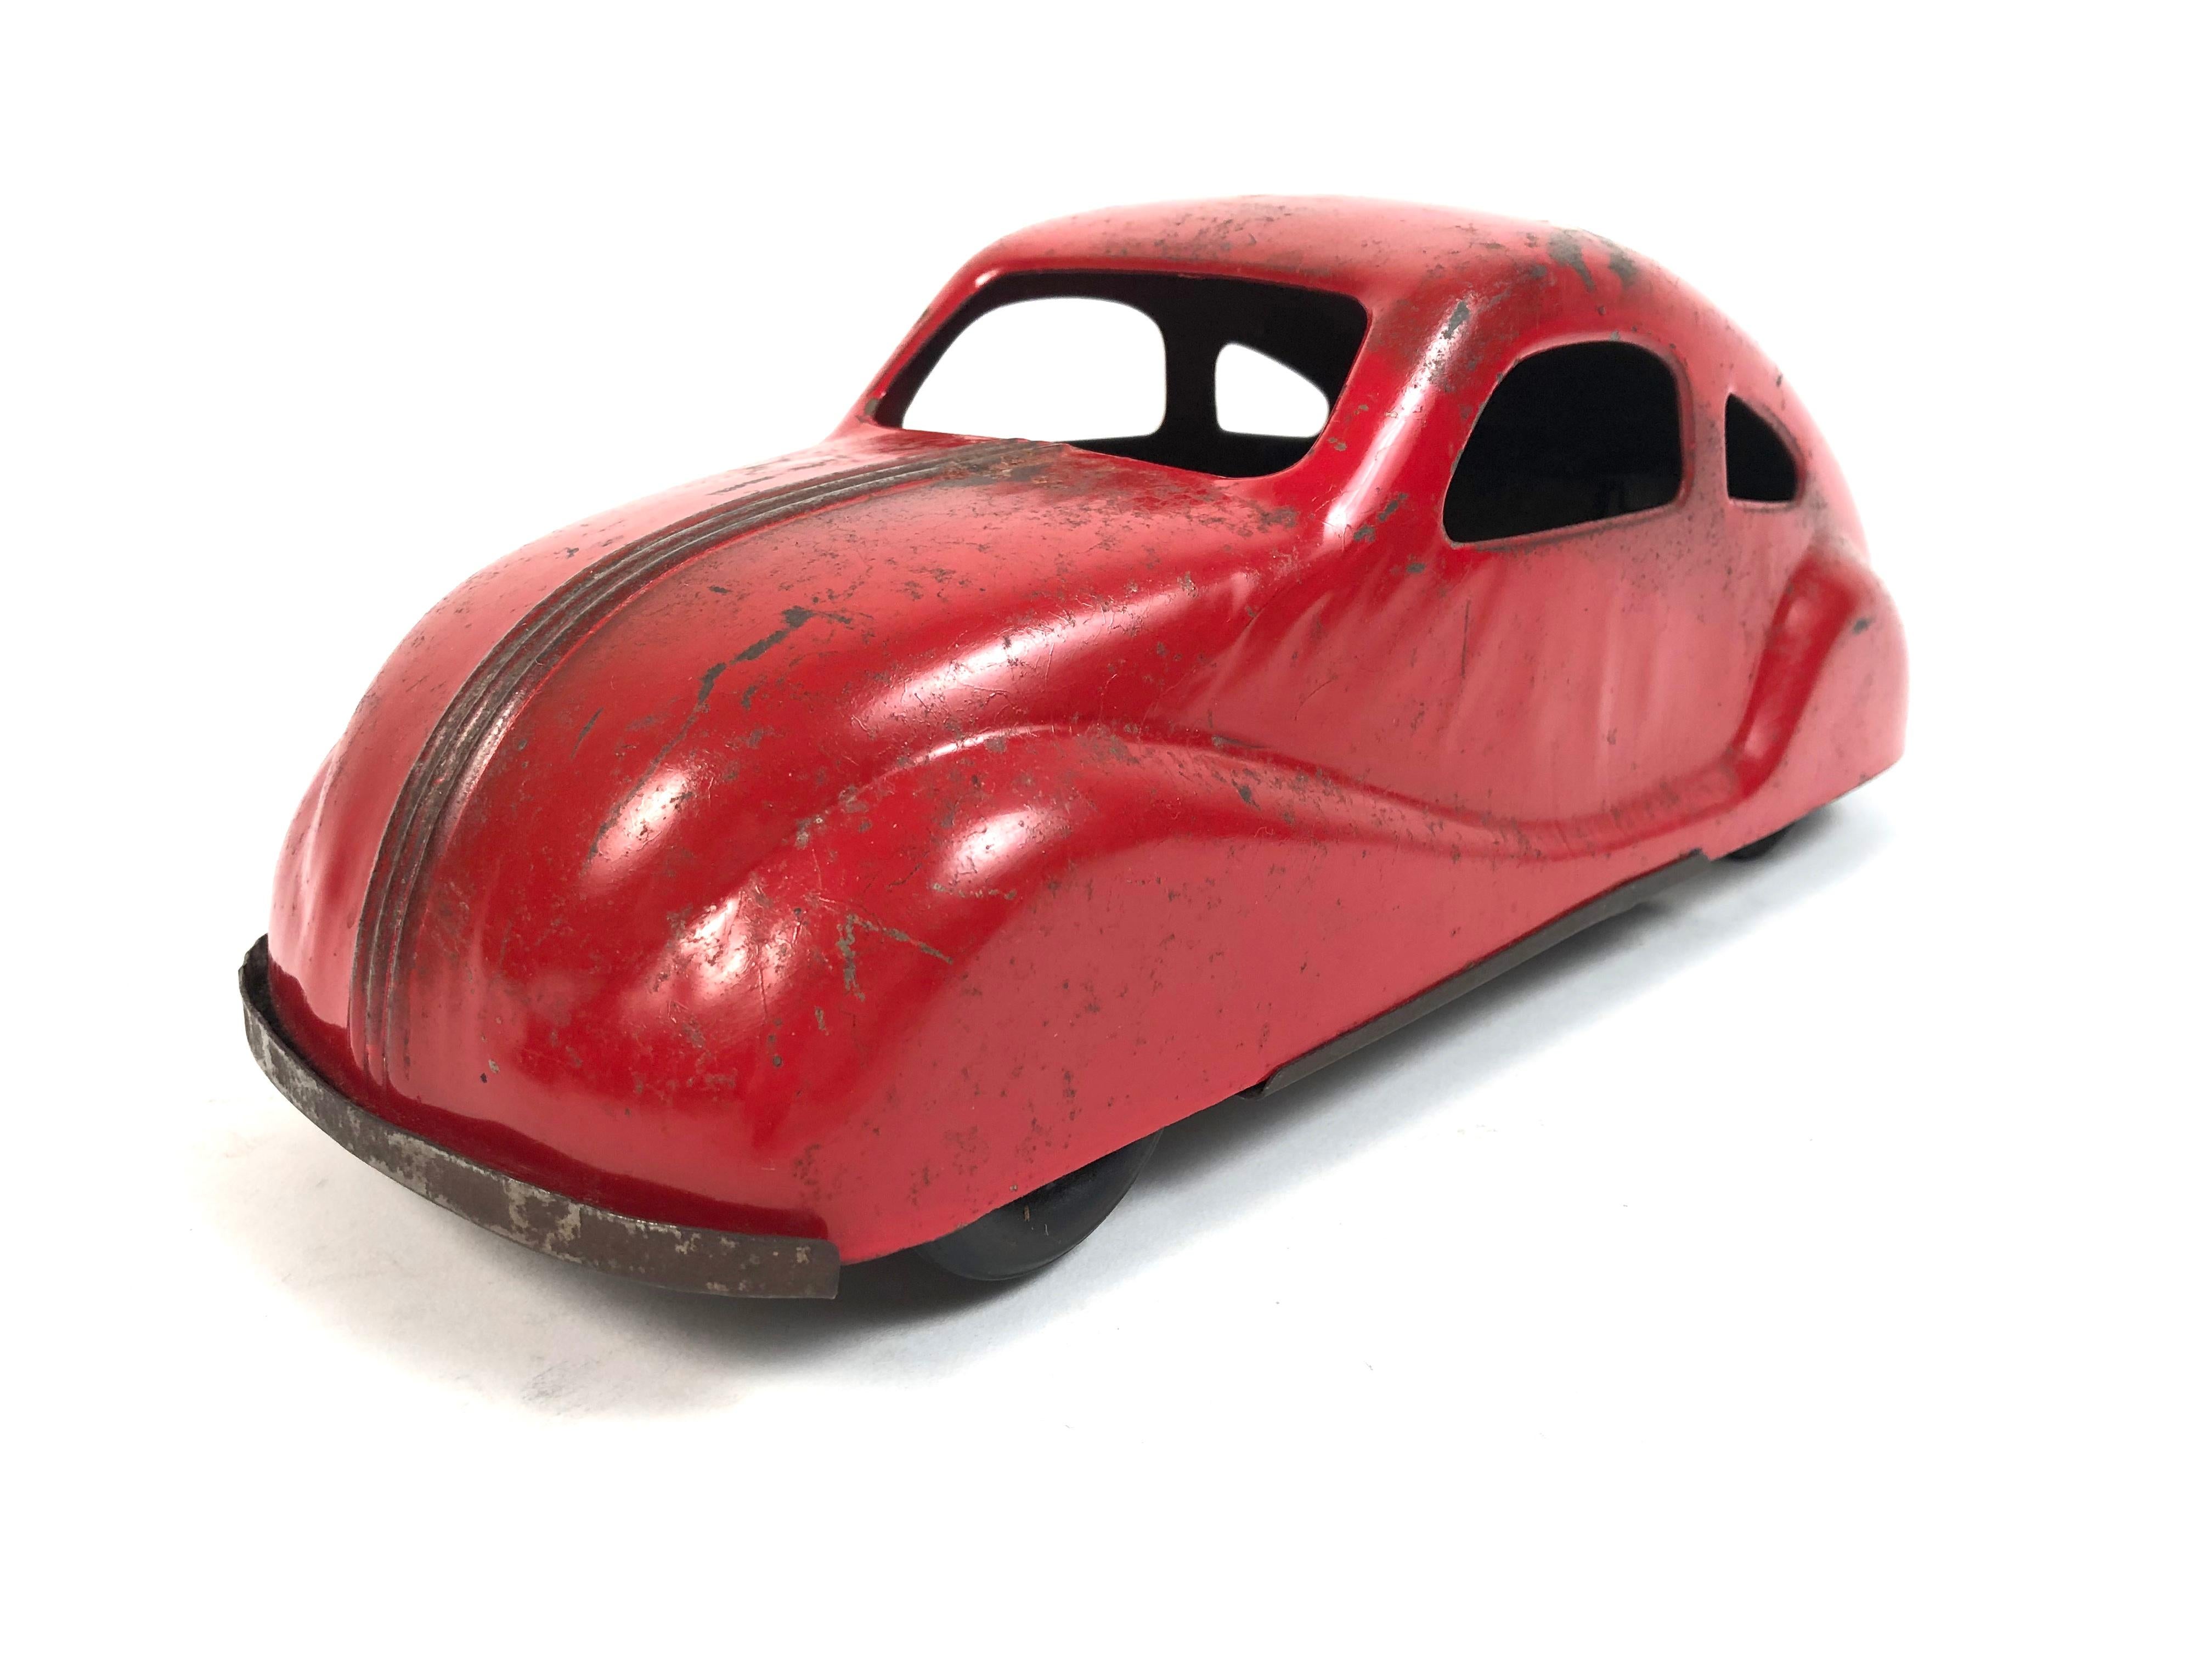 A sleek, streamlined 930s red painted pressed tin toy car by Wyandotte, (Michigan). Greta lines and retaining its original red painted surface.